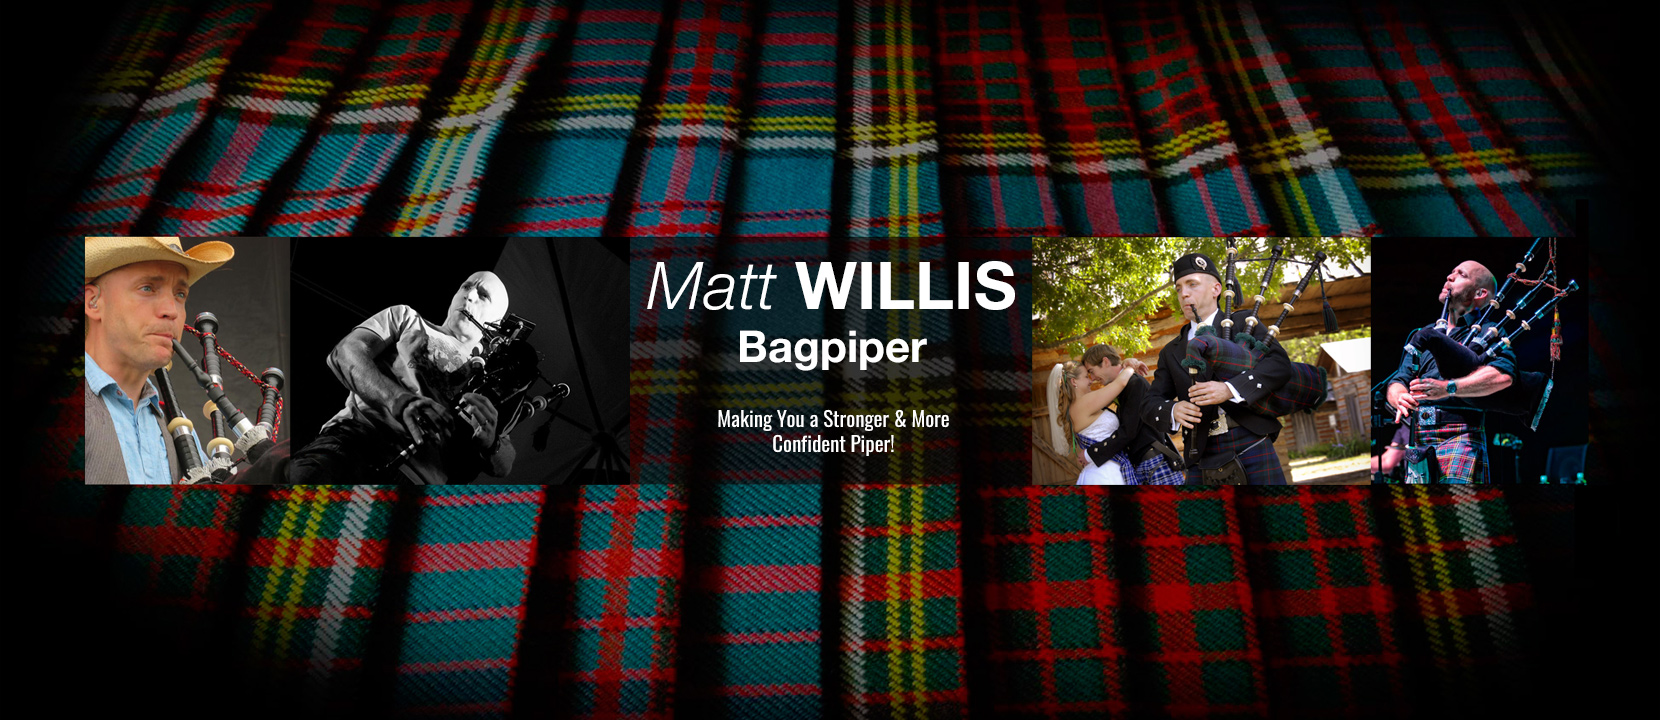 File:Bag piper, Padre, Currie Hall, Royal Military College of Canada, fall  2011.jpg - Wikipedia